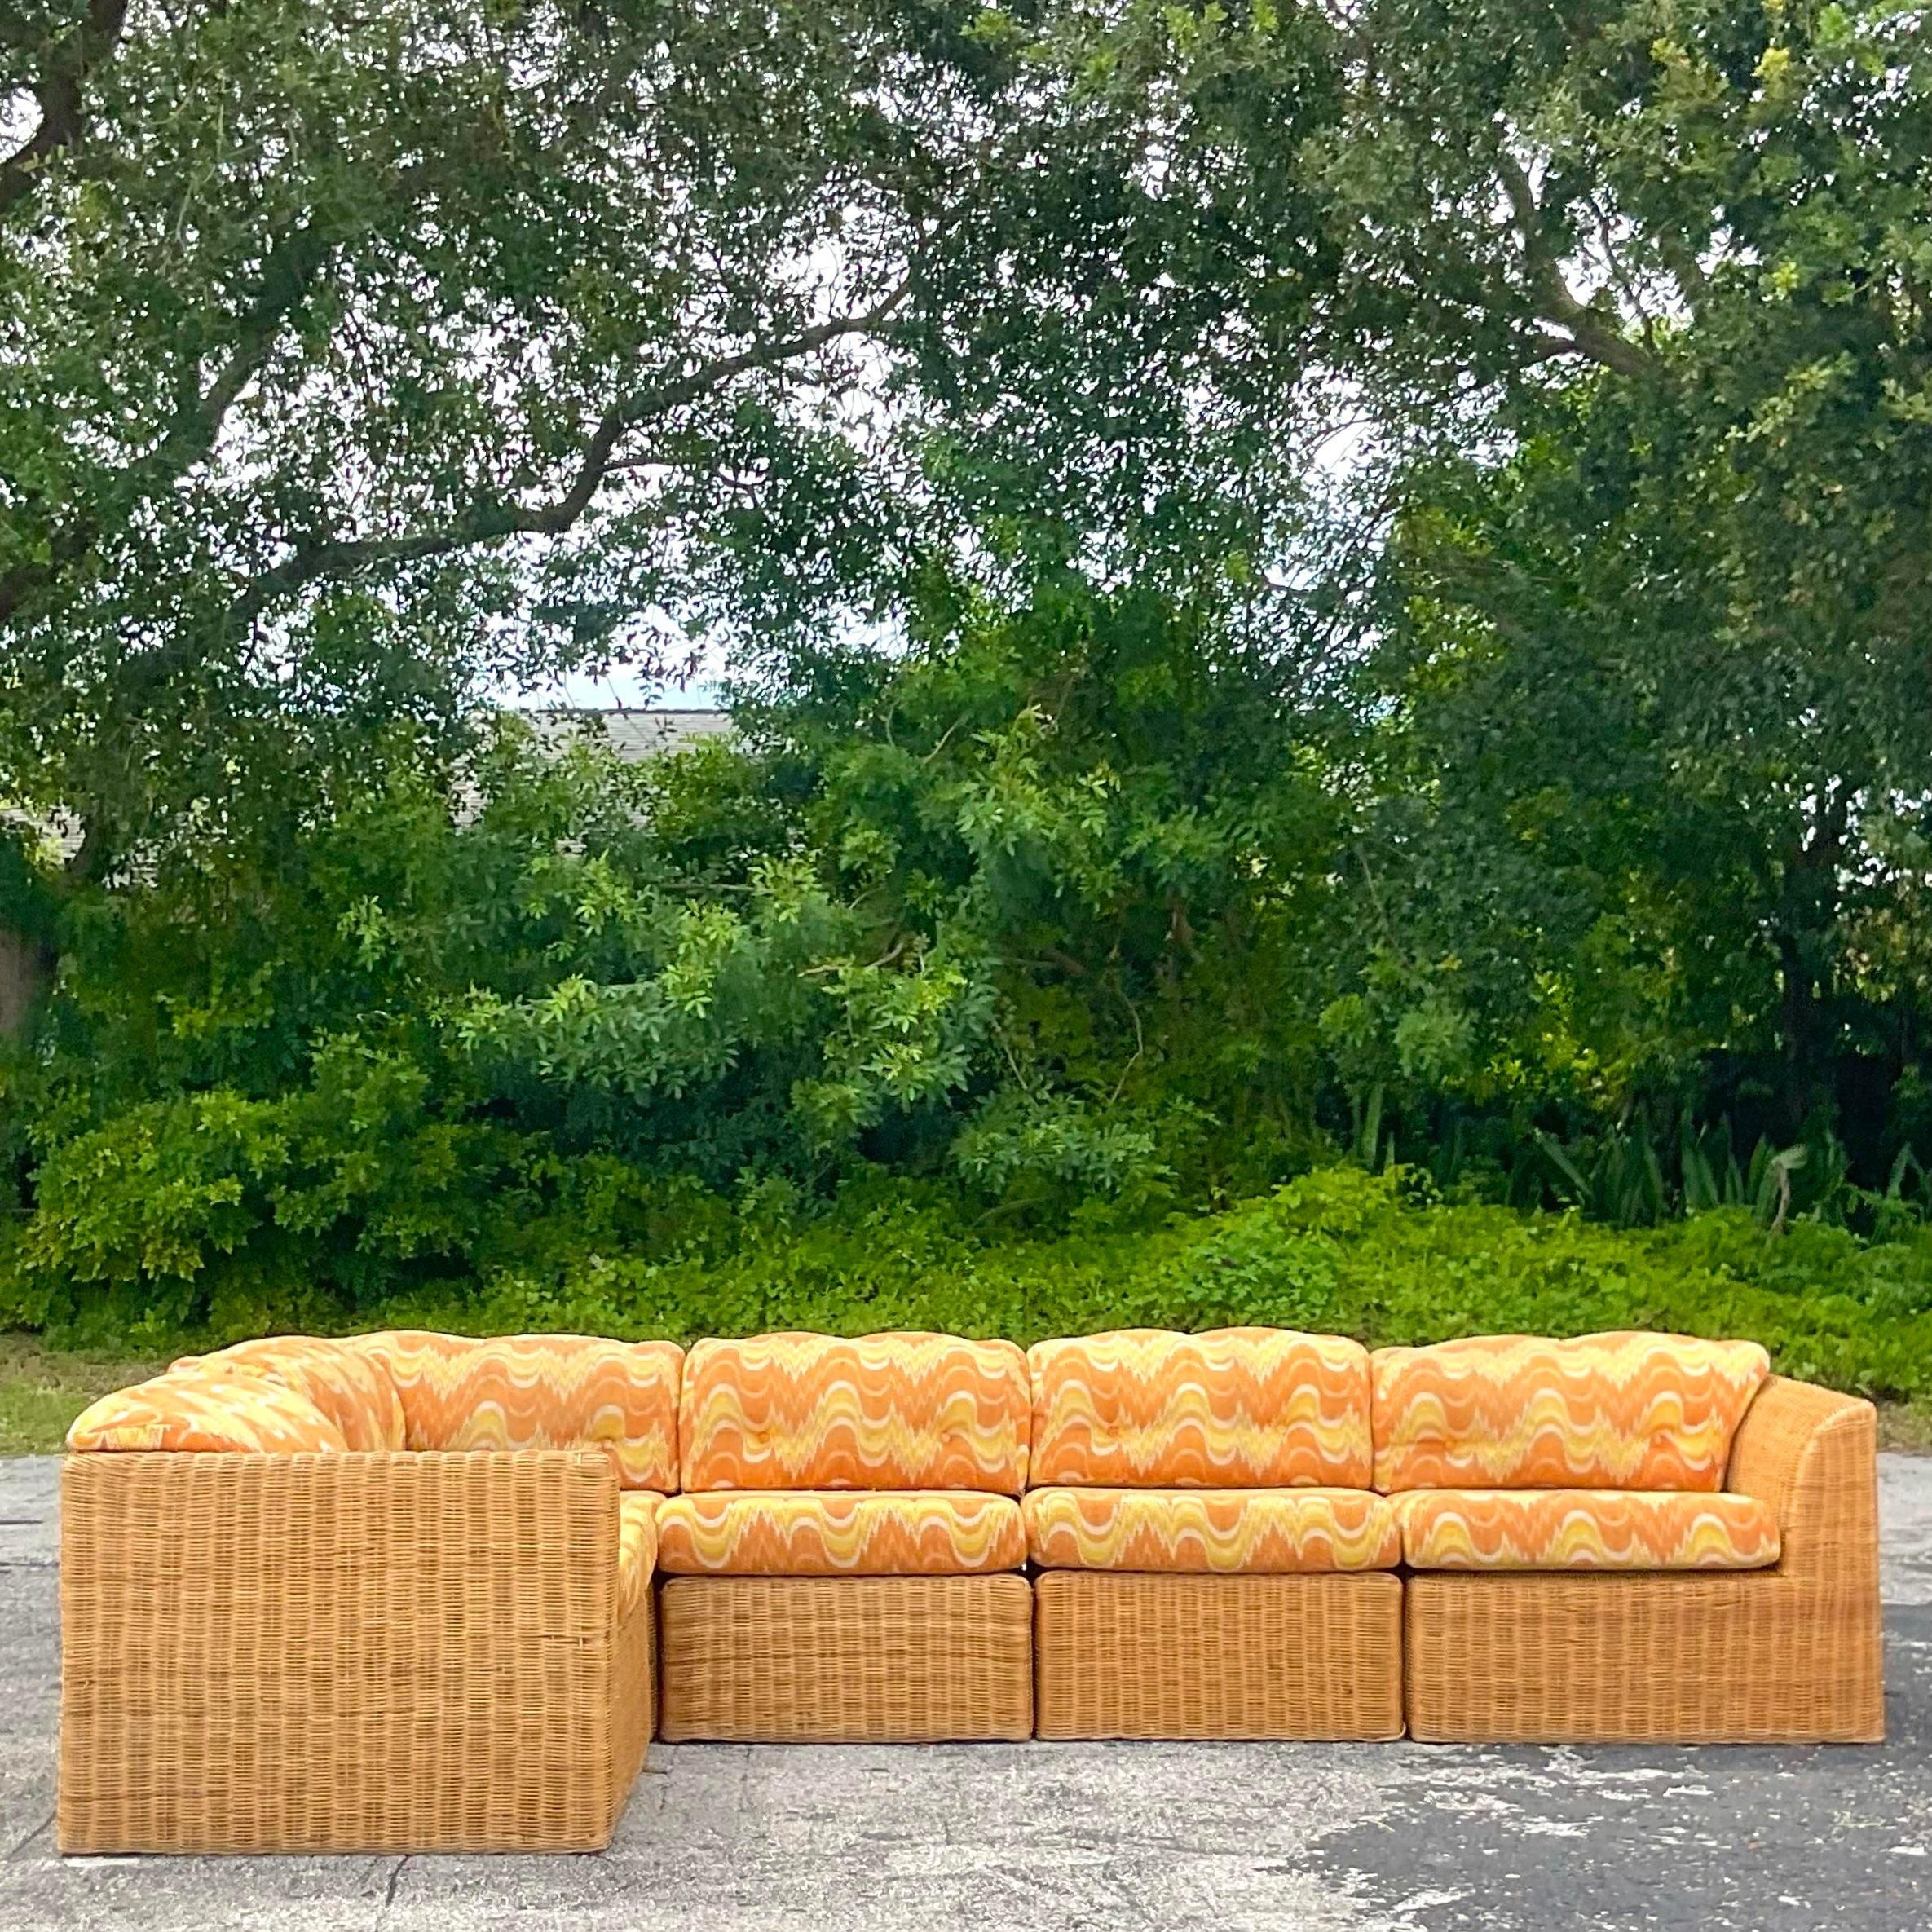 A fabulous vintage Coastal sectional sofa. A chic woven rattan frame with the most amazing vintage flame stitch upholstery. A real statement piece. Acquired from a Palm Beach estate.

Long side 121
Short side return 67
Corner piece 33x33x30h
Slipper